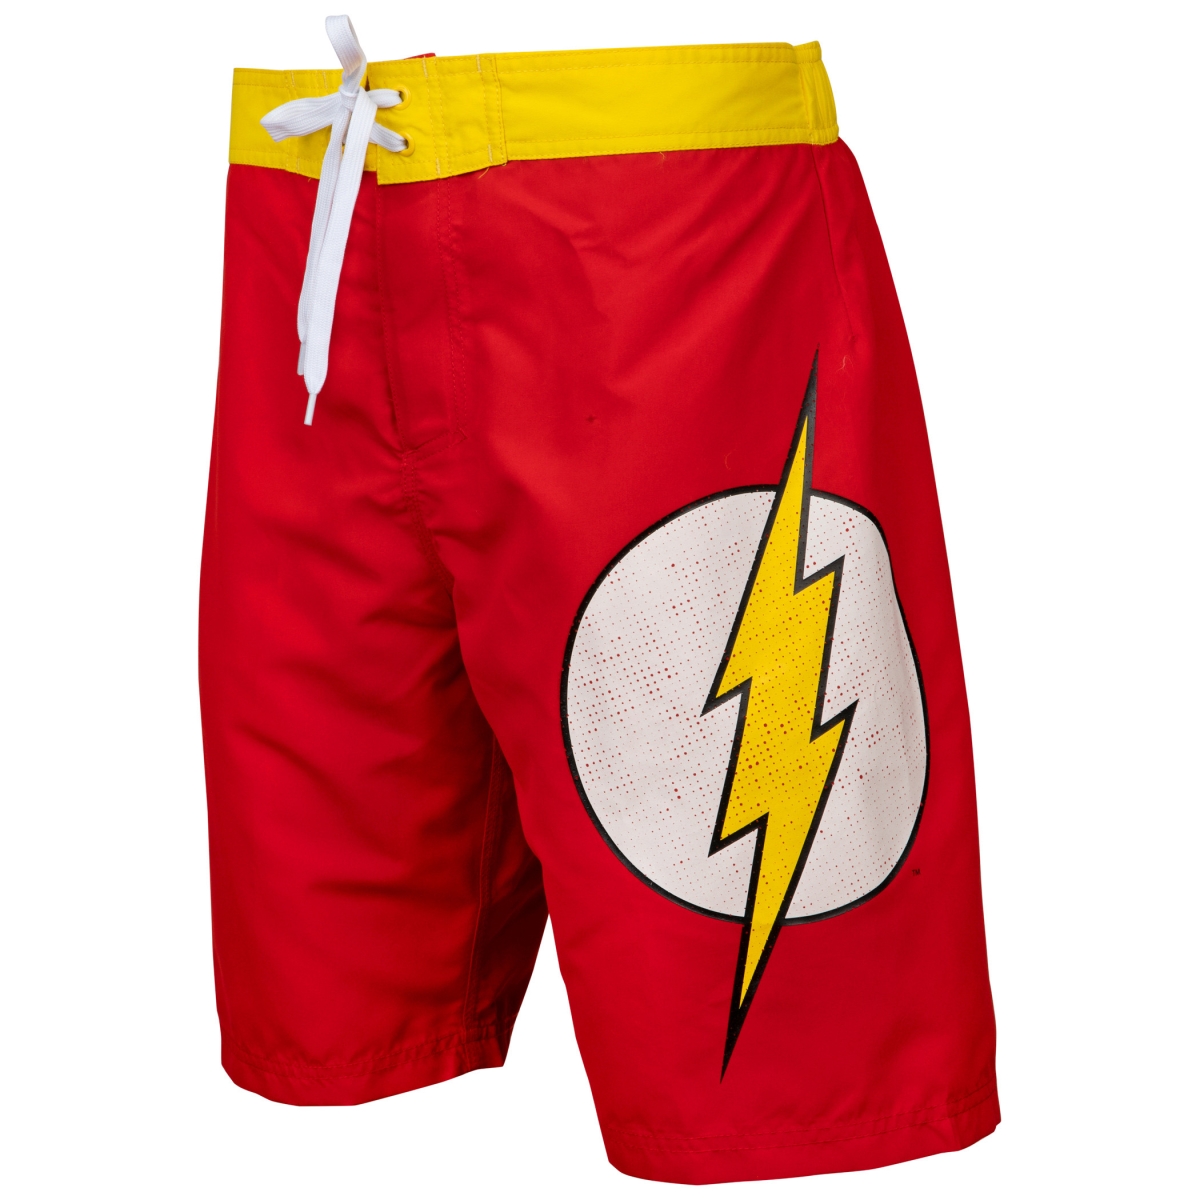 Picture of Flash 803503-xlarge 40-42 Flash Symbol Board Shorts, Heather Red - Extra Large 40-42